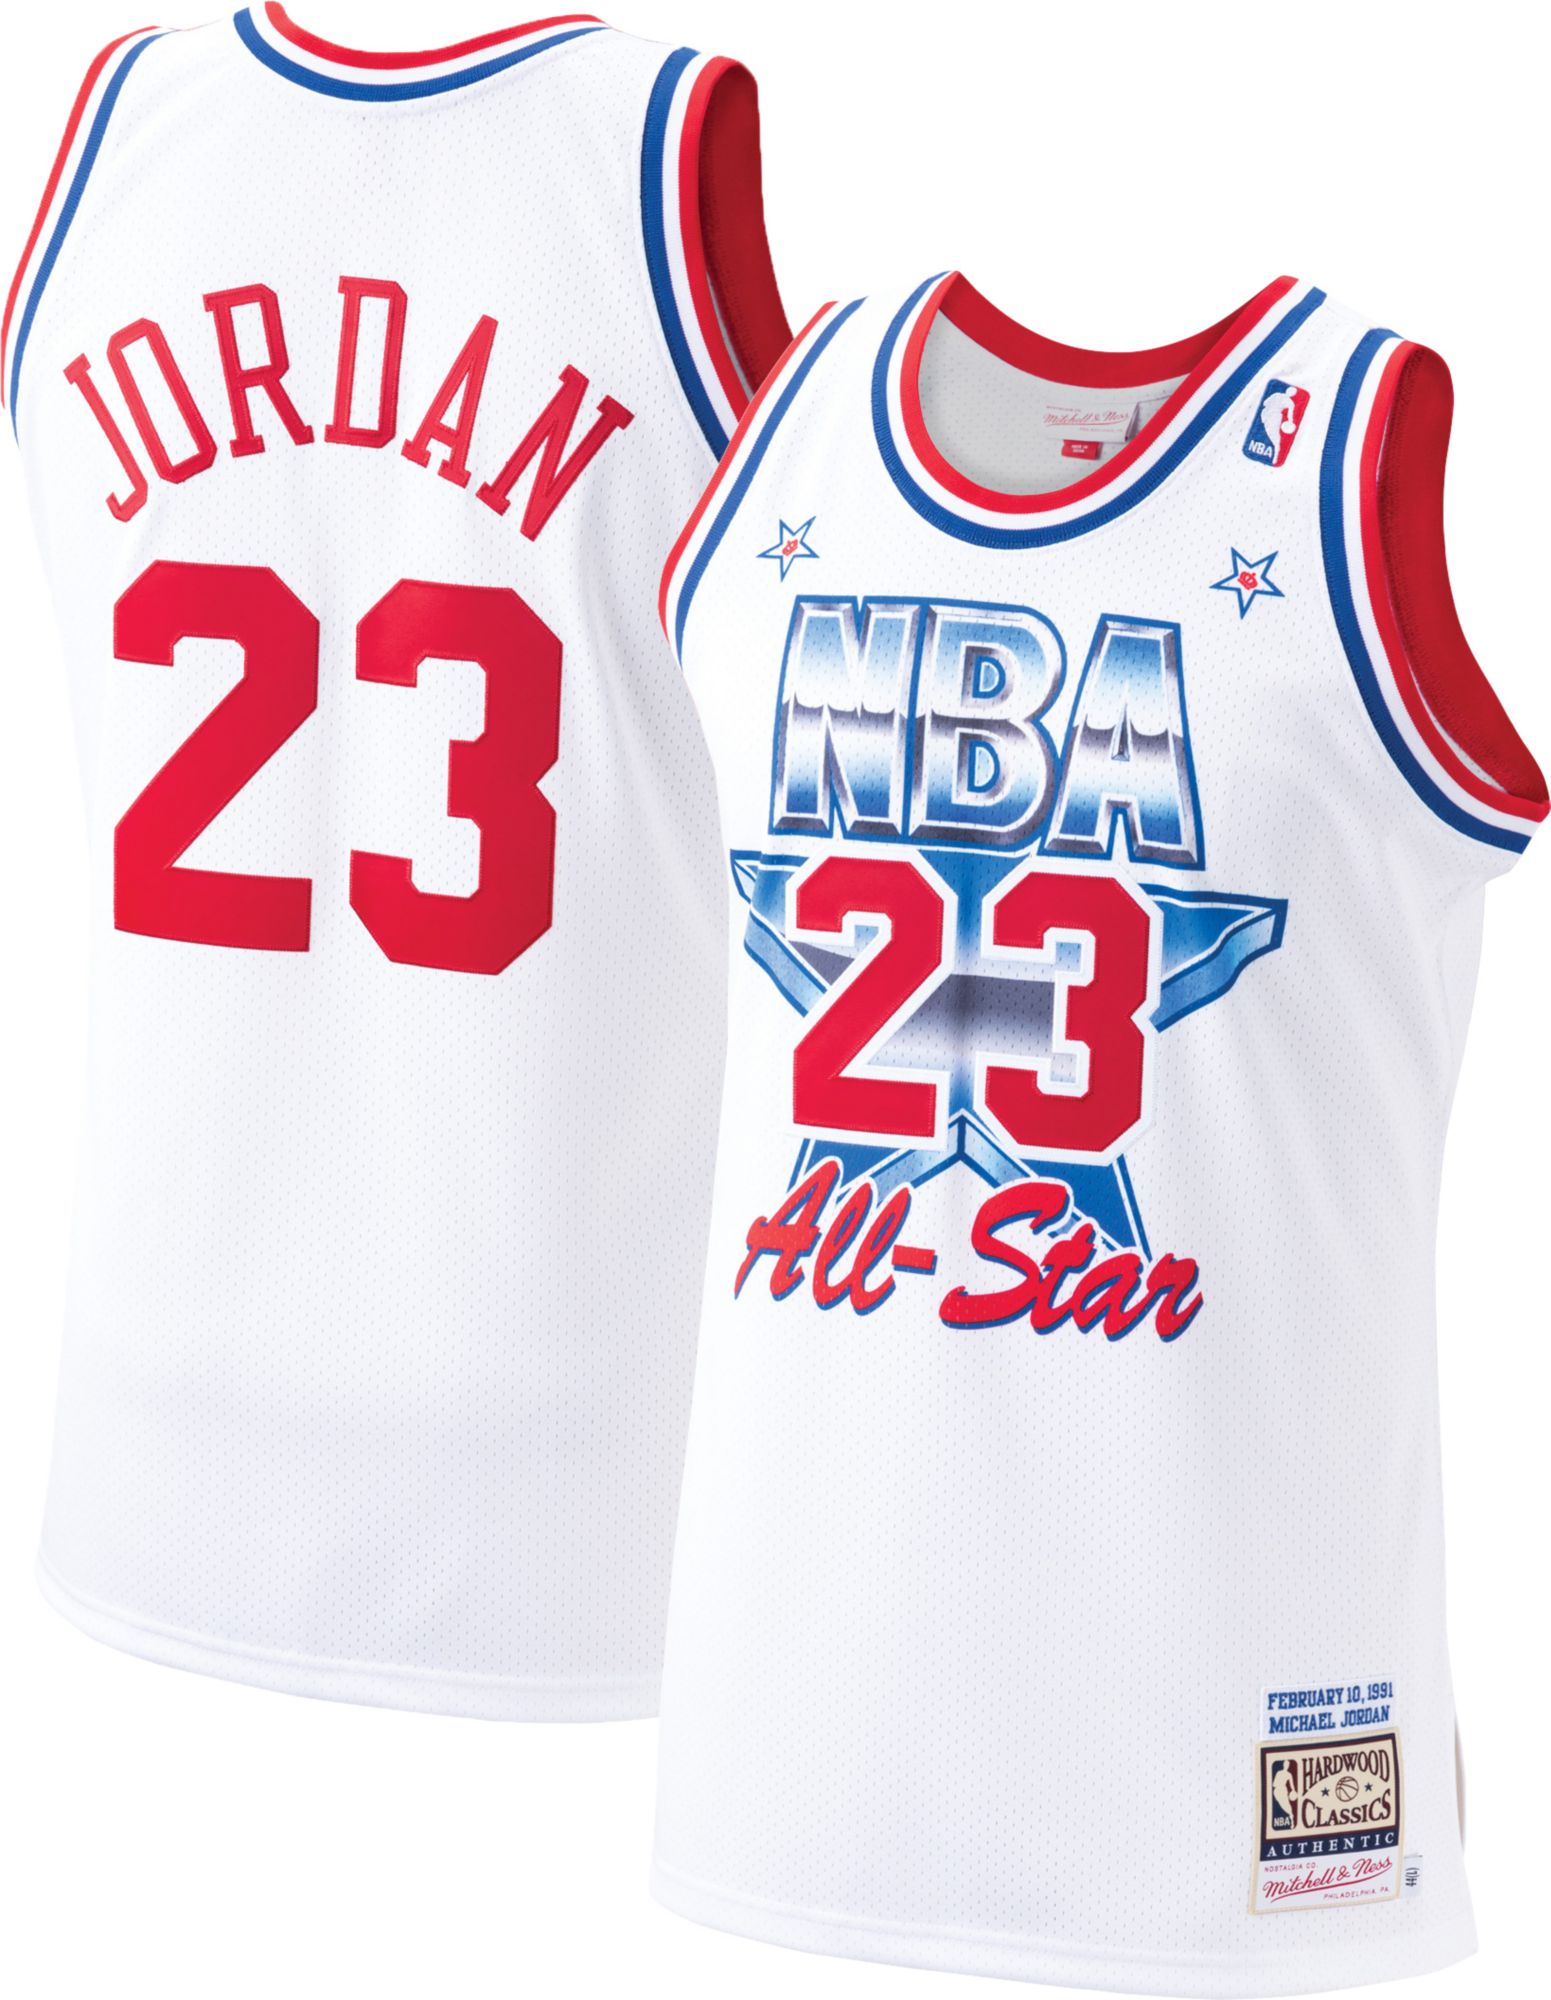 red and white jordan jersey